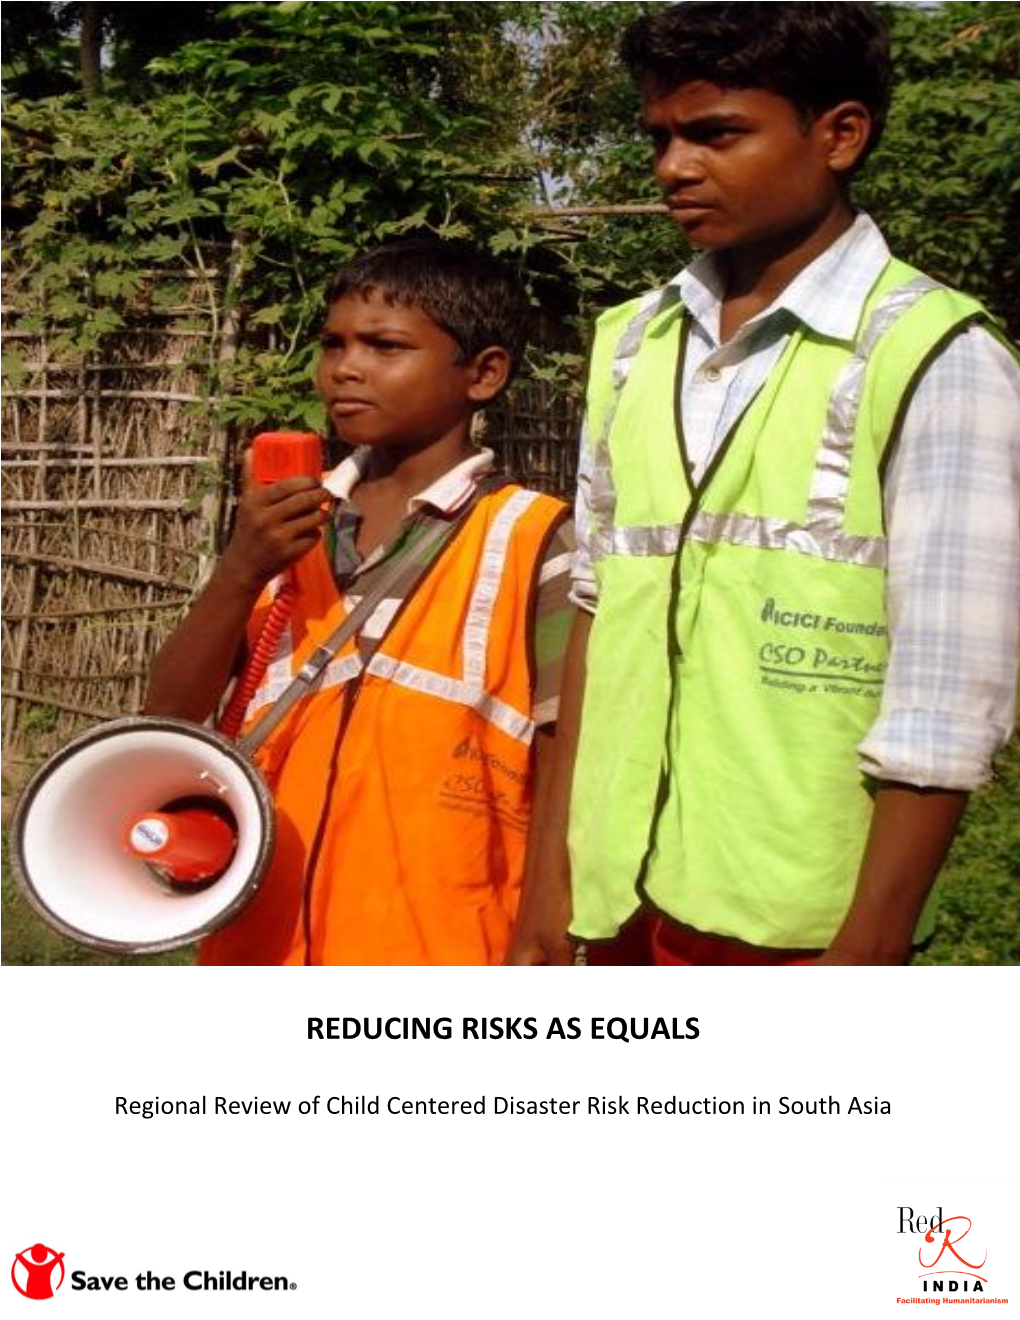 Regional Review of Child Centered Disaster Risk Reduction in South Asia